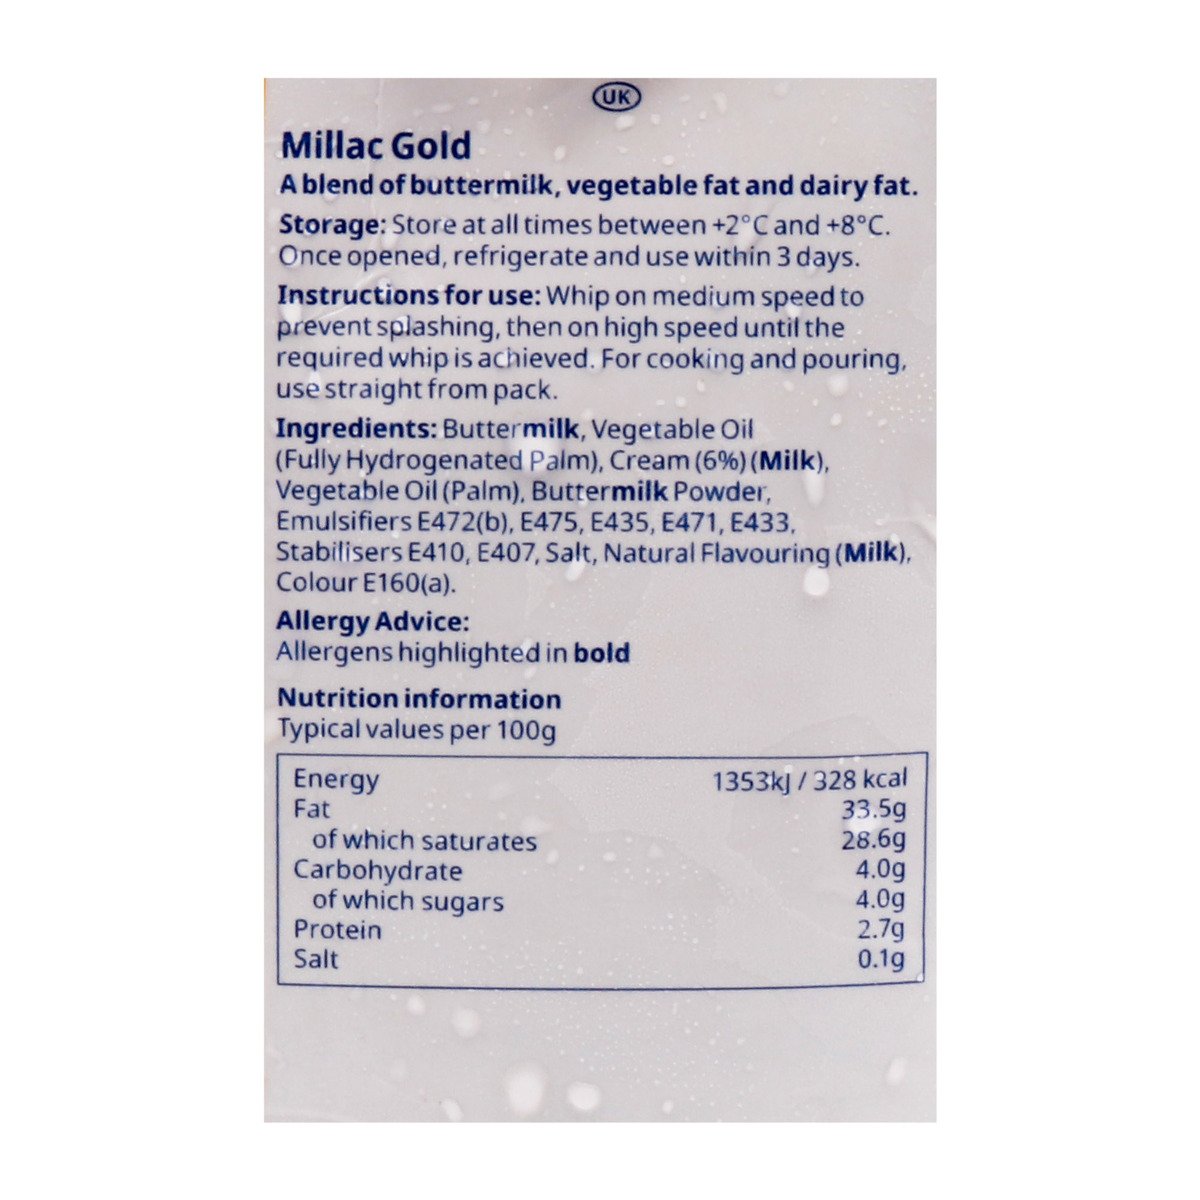 Millac Gold Whipping, Cooking & Pouring 1 Litre